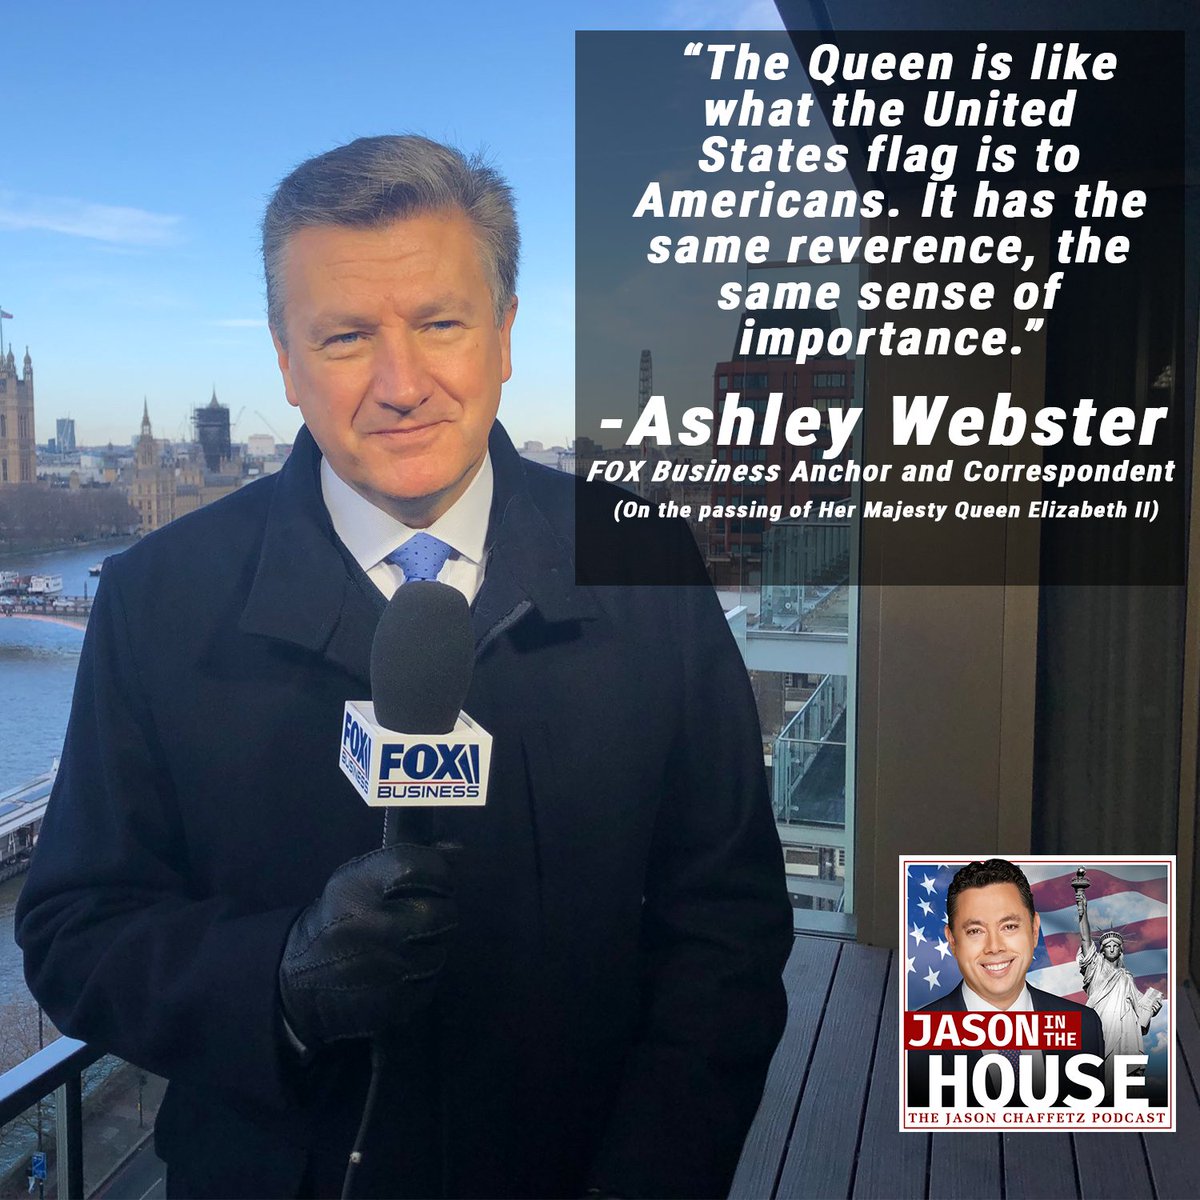 #FOXBusiness Anchor @AshWebsterFBN pays homage to the late Queen Elizabeth II & reflects on the significance of her reign, on the latest @JasonintheHouse podcast: buff.ly/37LSZzY